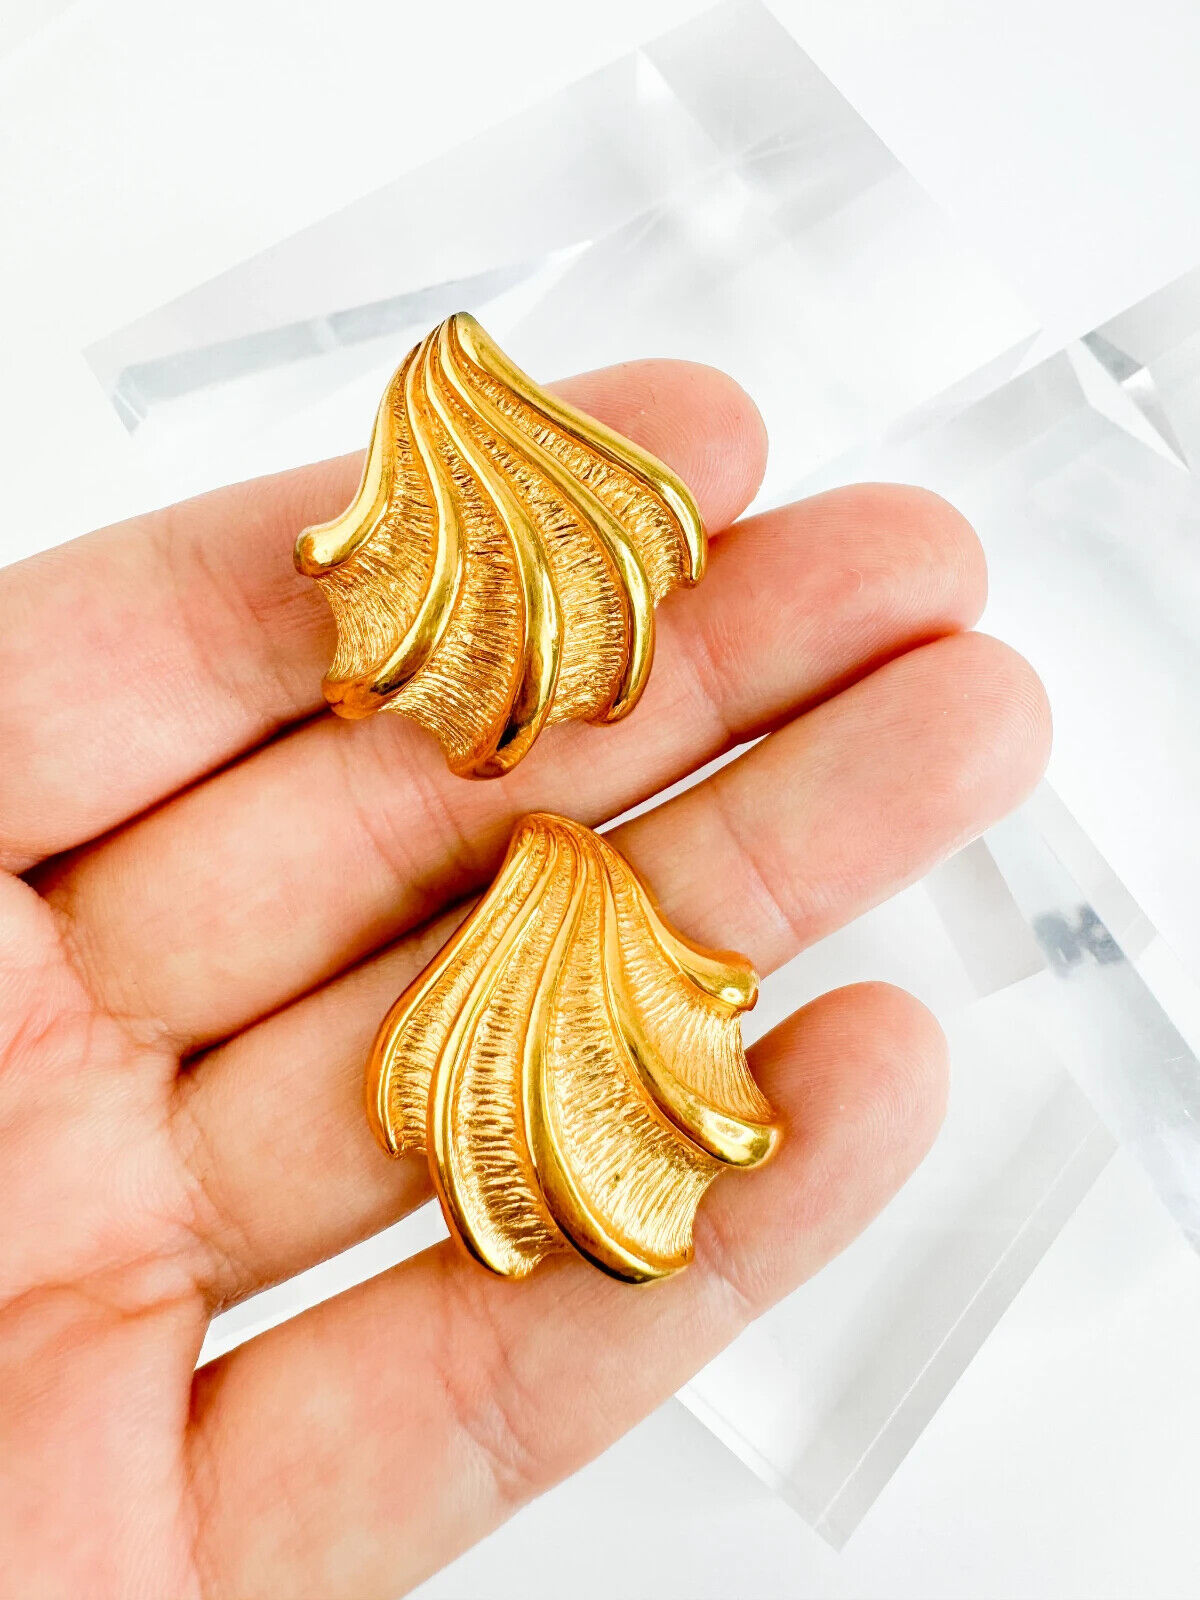 Vintage Lanvin Earrings, Shell Clip-On Earrings, Made in Germany, Gold Tone Earrings, Jewelry for Women, Vintage Jewelry, Gift for her